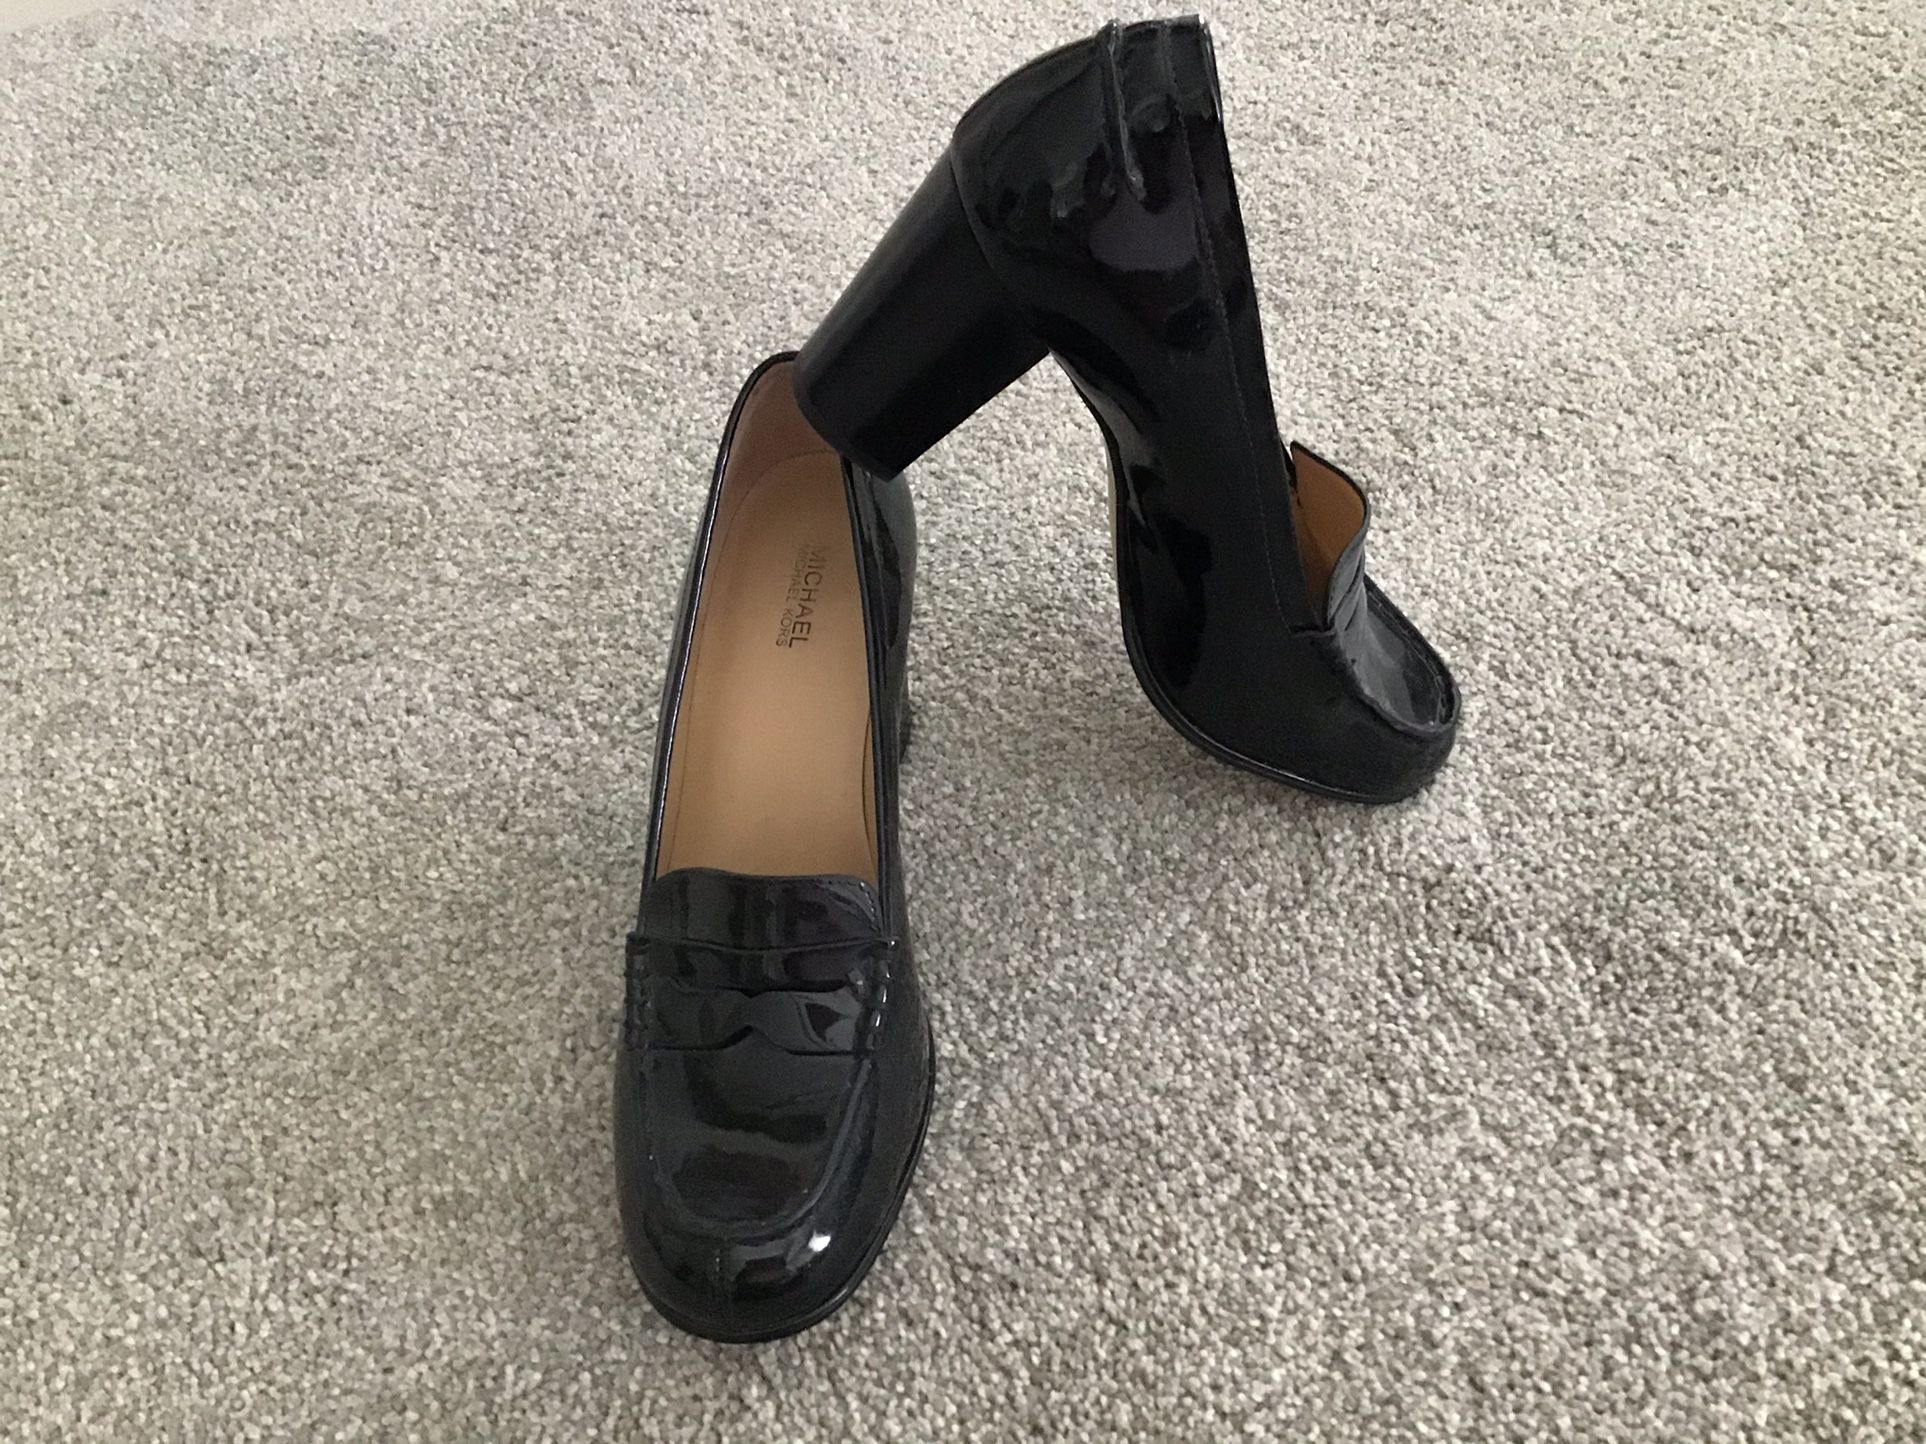 MICHAEL KORS WOMENS SIZE 8 M BLACK LEATHER HIGH HEEL PUMPS PATENT LEATHER DRESS SHOES WORK PARTY